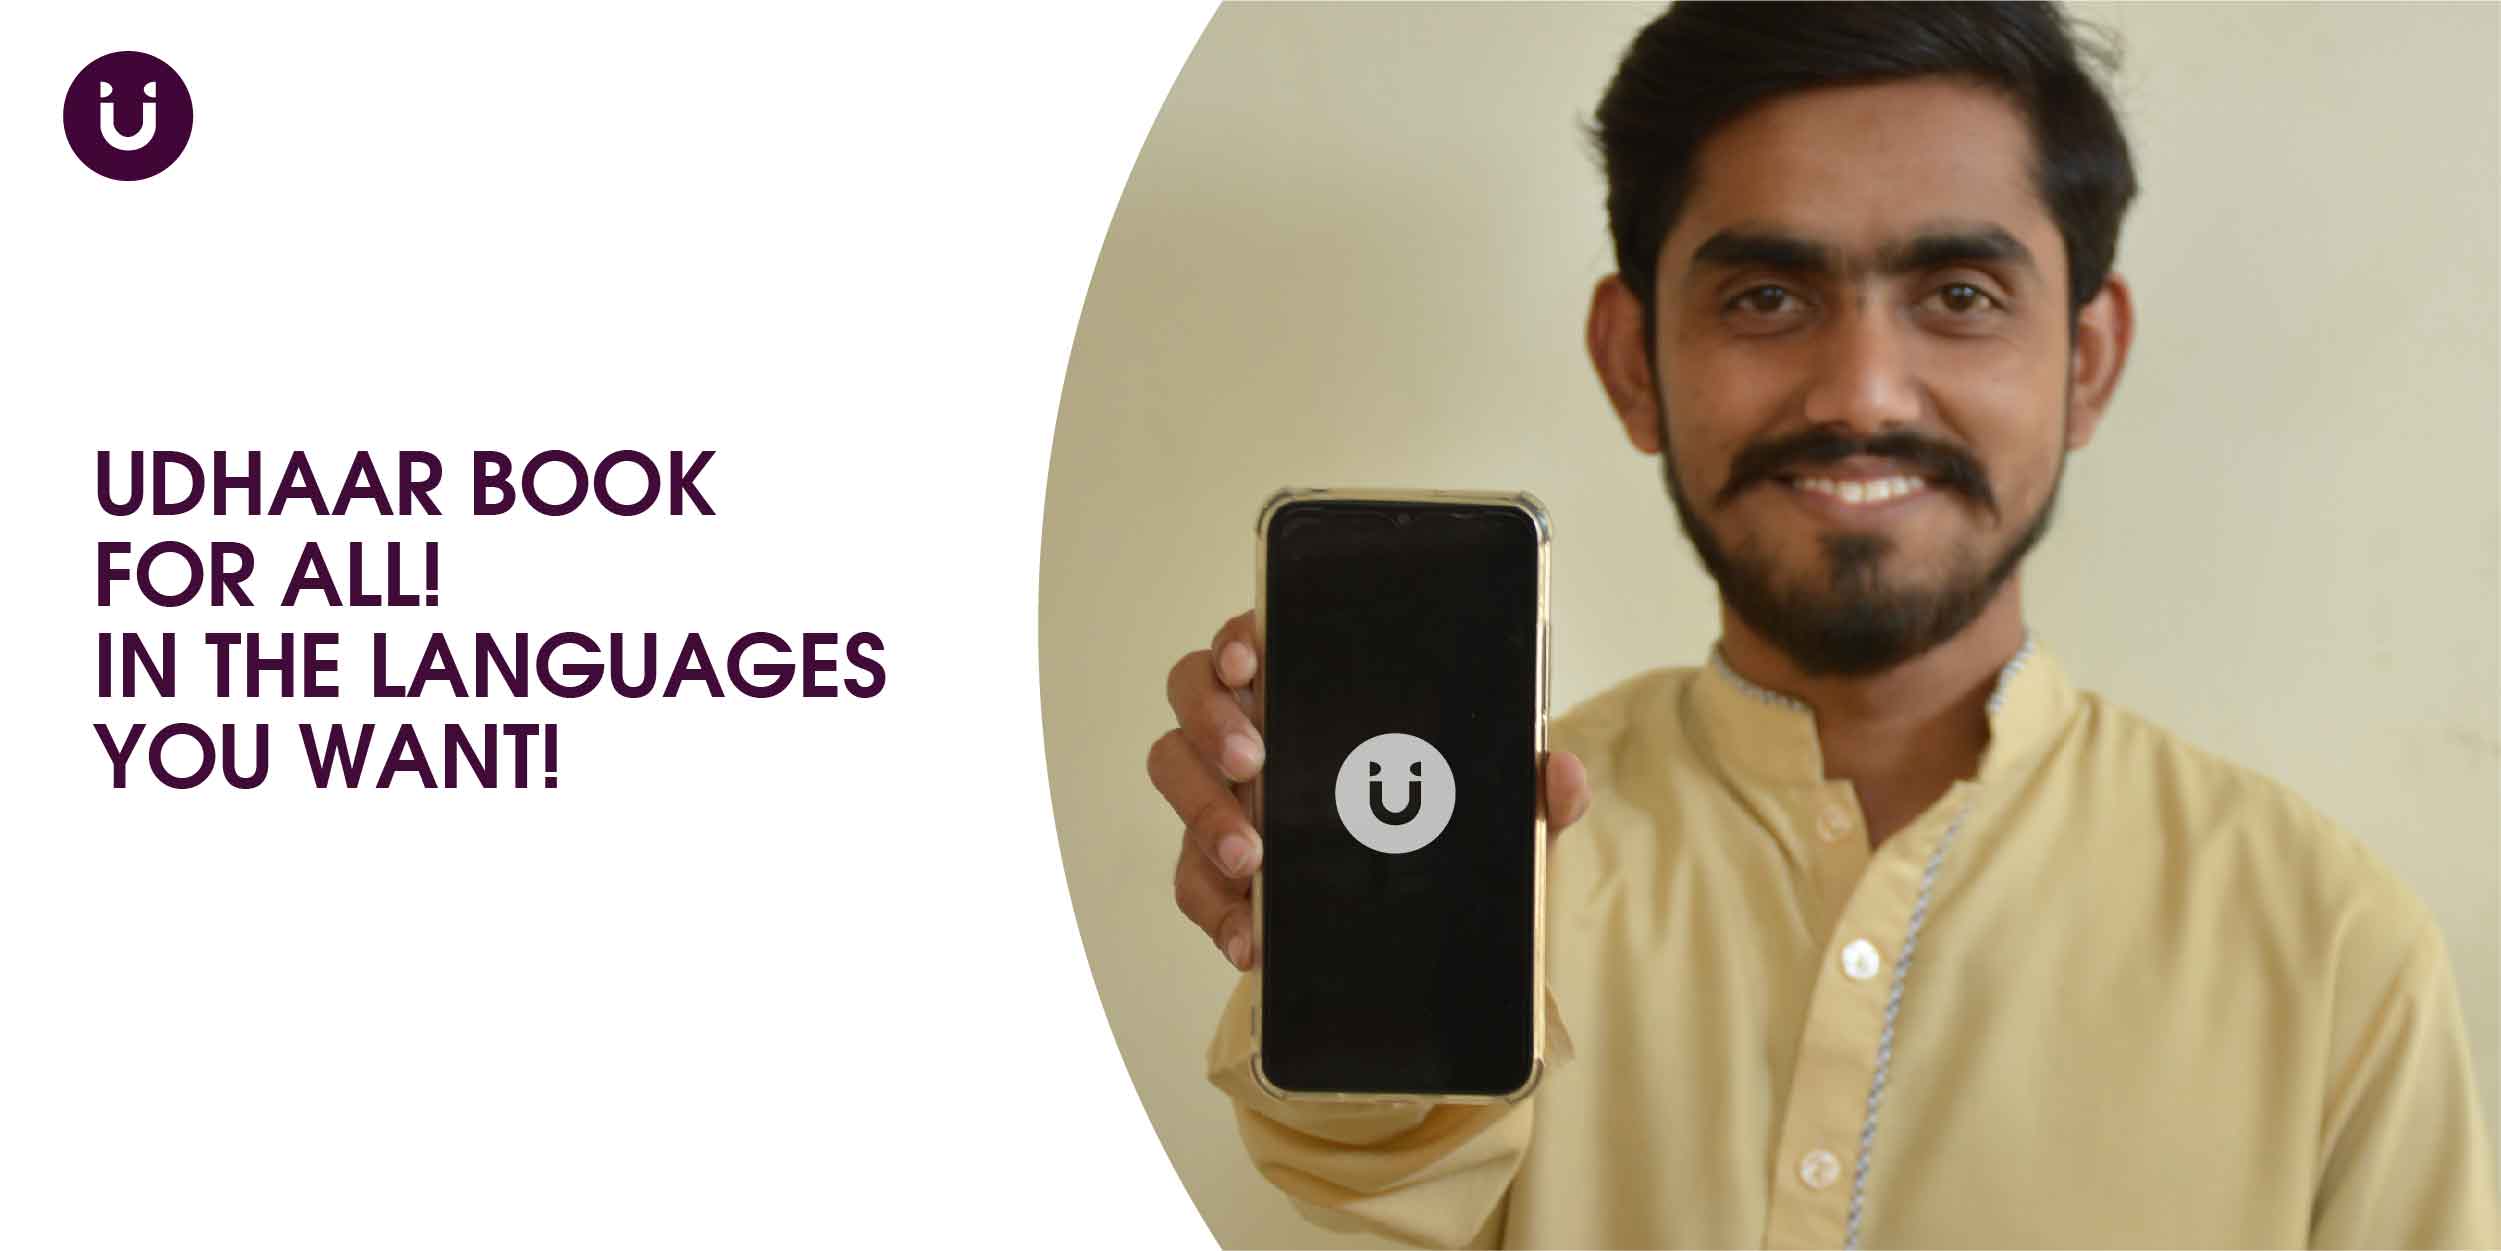 Udhaar Book for All! In the Languages you want!